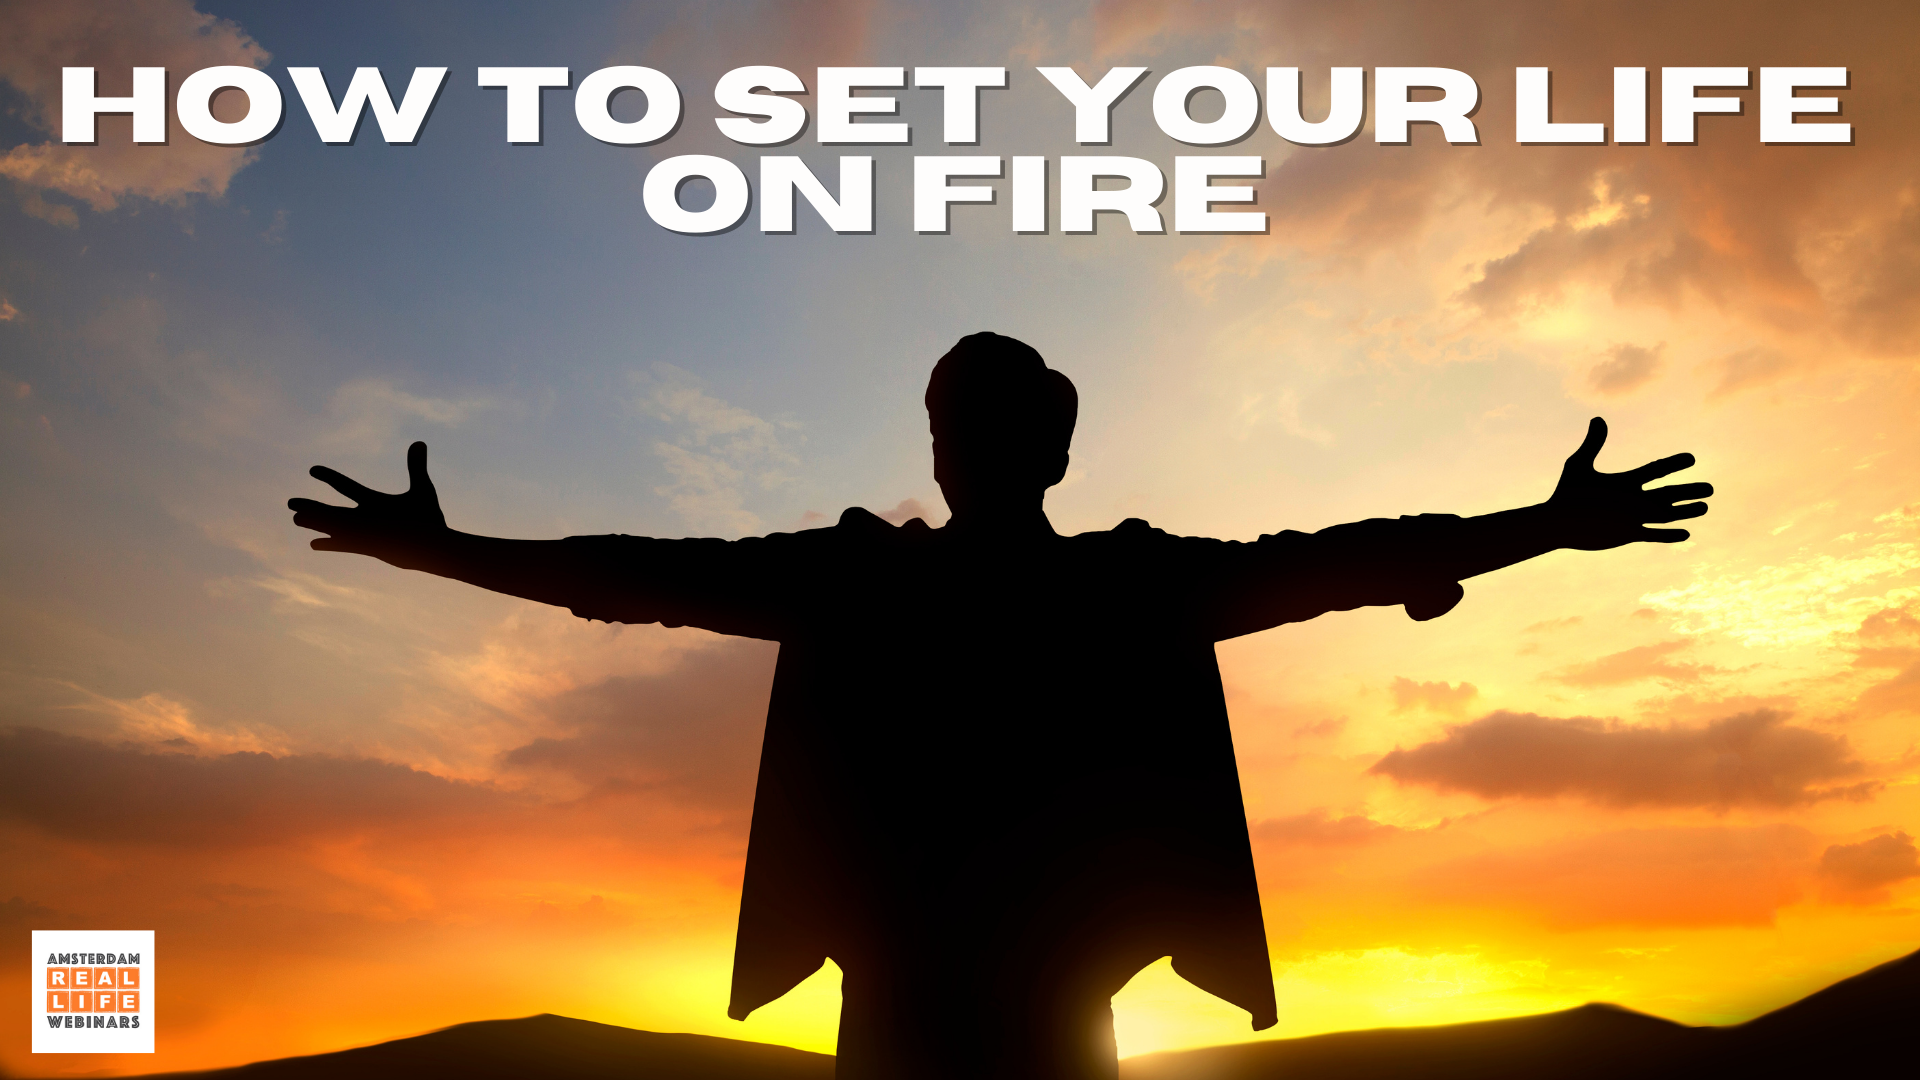 How to set your life on fire